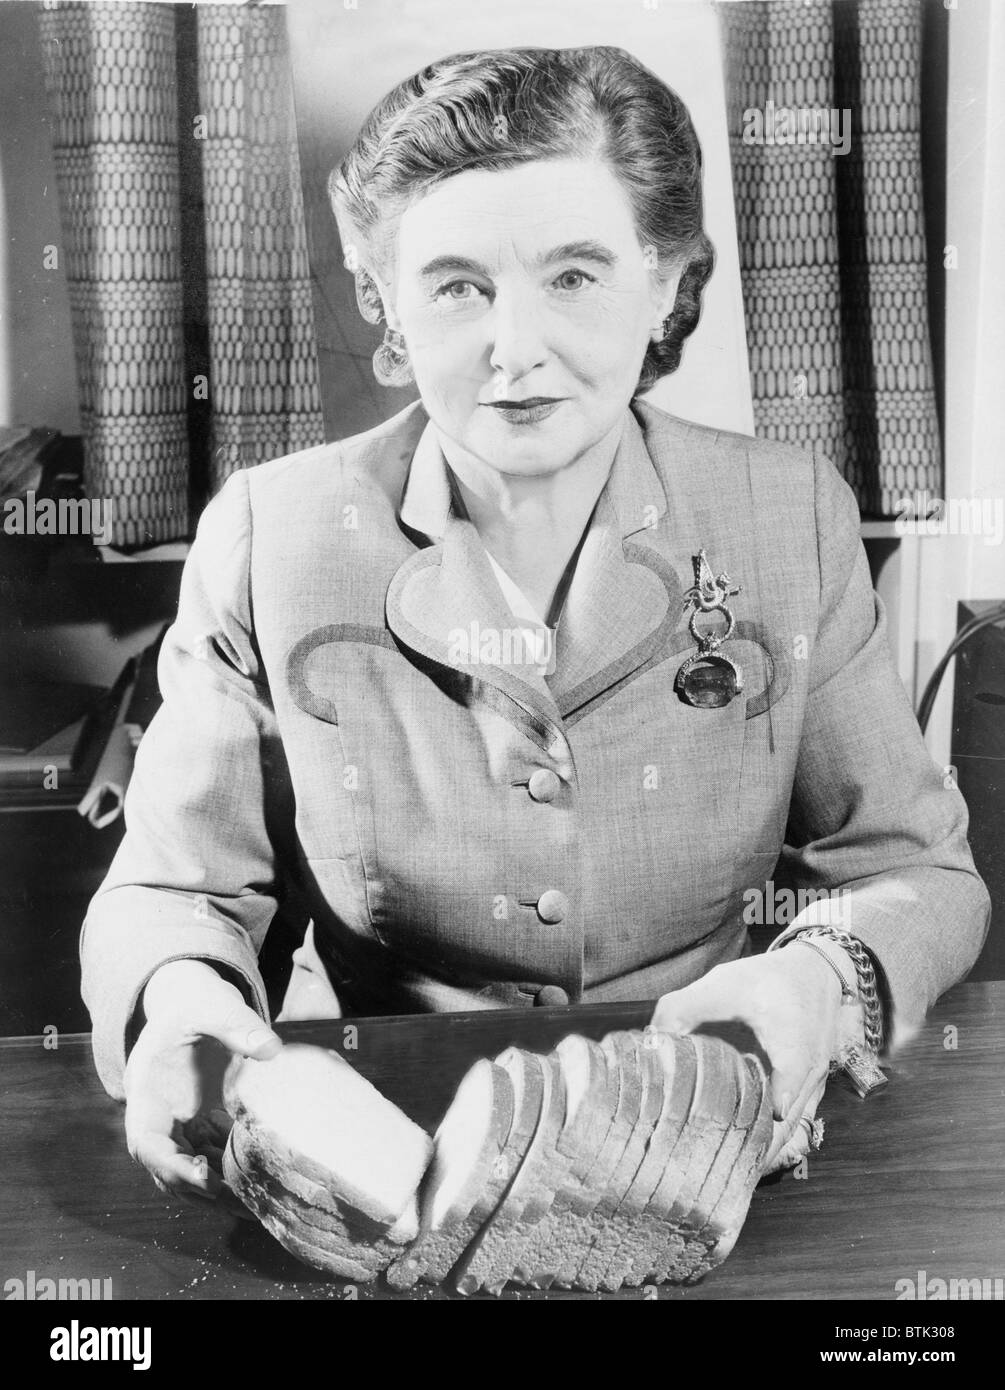 Margaret Rudkin (1897-1967) was the founder of the Pepperidge Farm brand. She named her bakery business after her home in Connecticut, and built the business over thirty years before selling it to the Campbell Soup company in 1961. Stock Photo